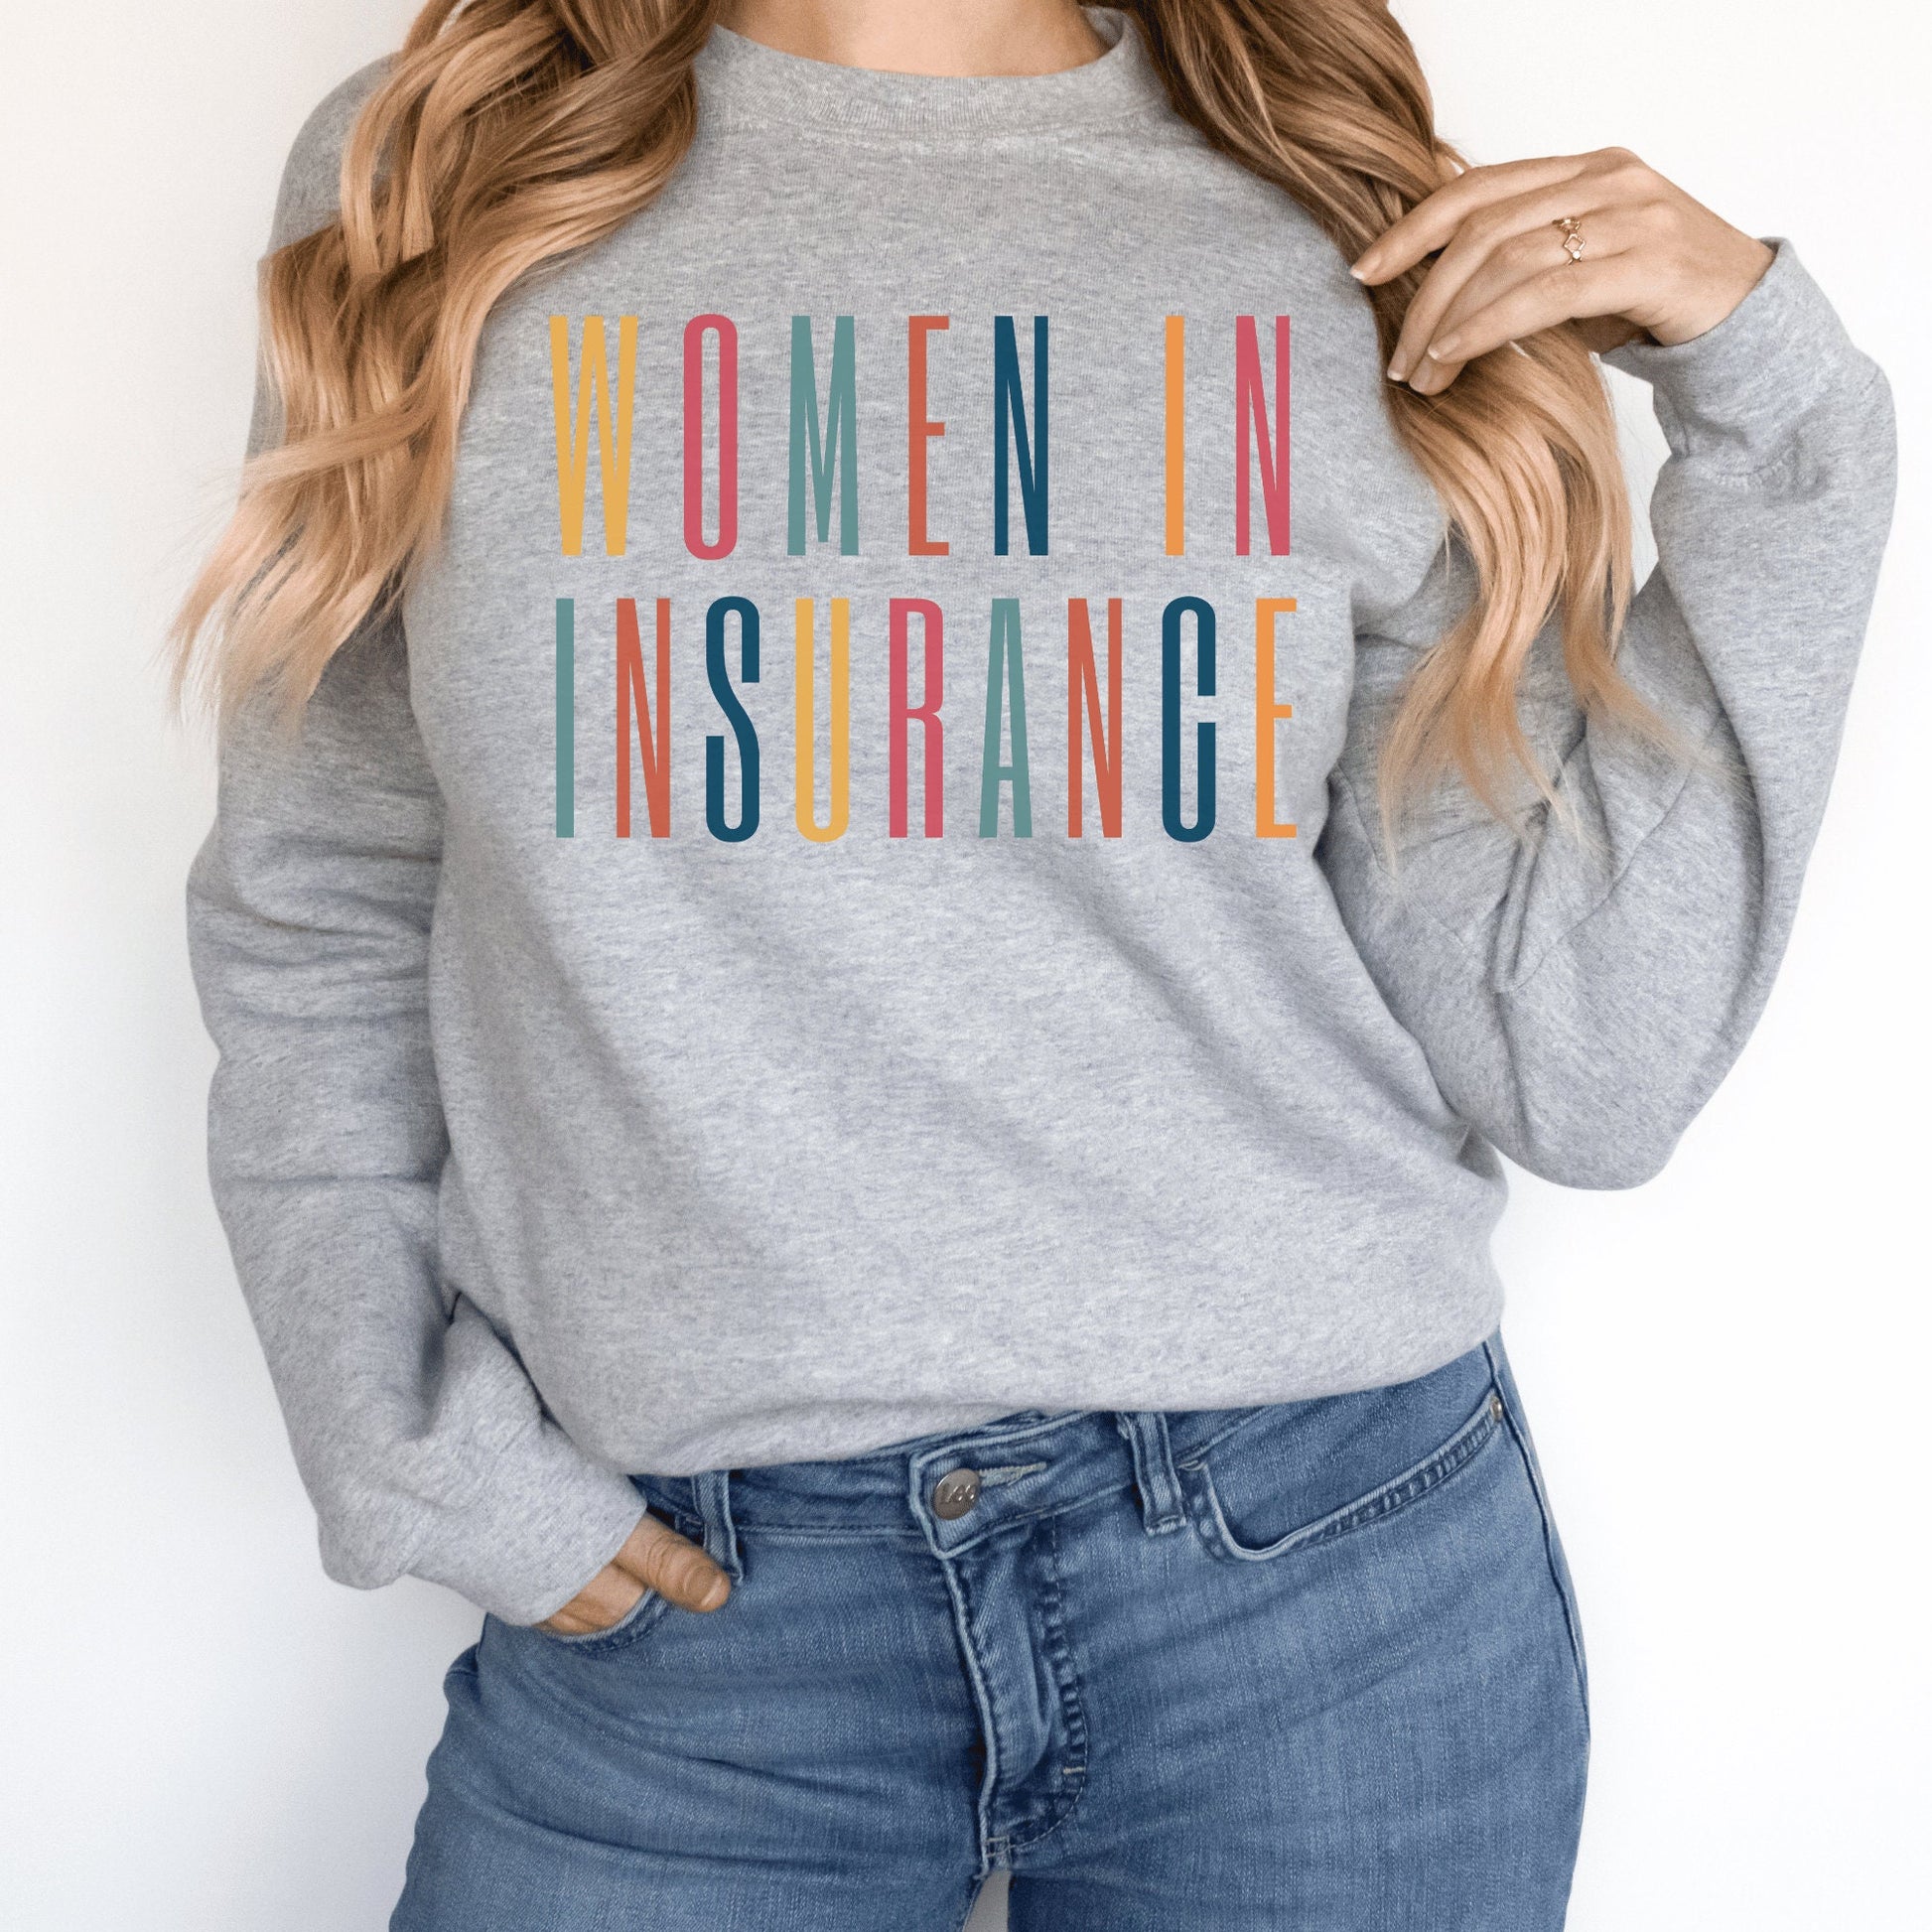 gray unisex sweatshirt that says "women in insurance" in all capital, multicolored letters and makes the perfect gift for an insurance agent